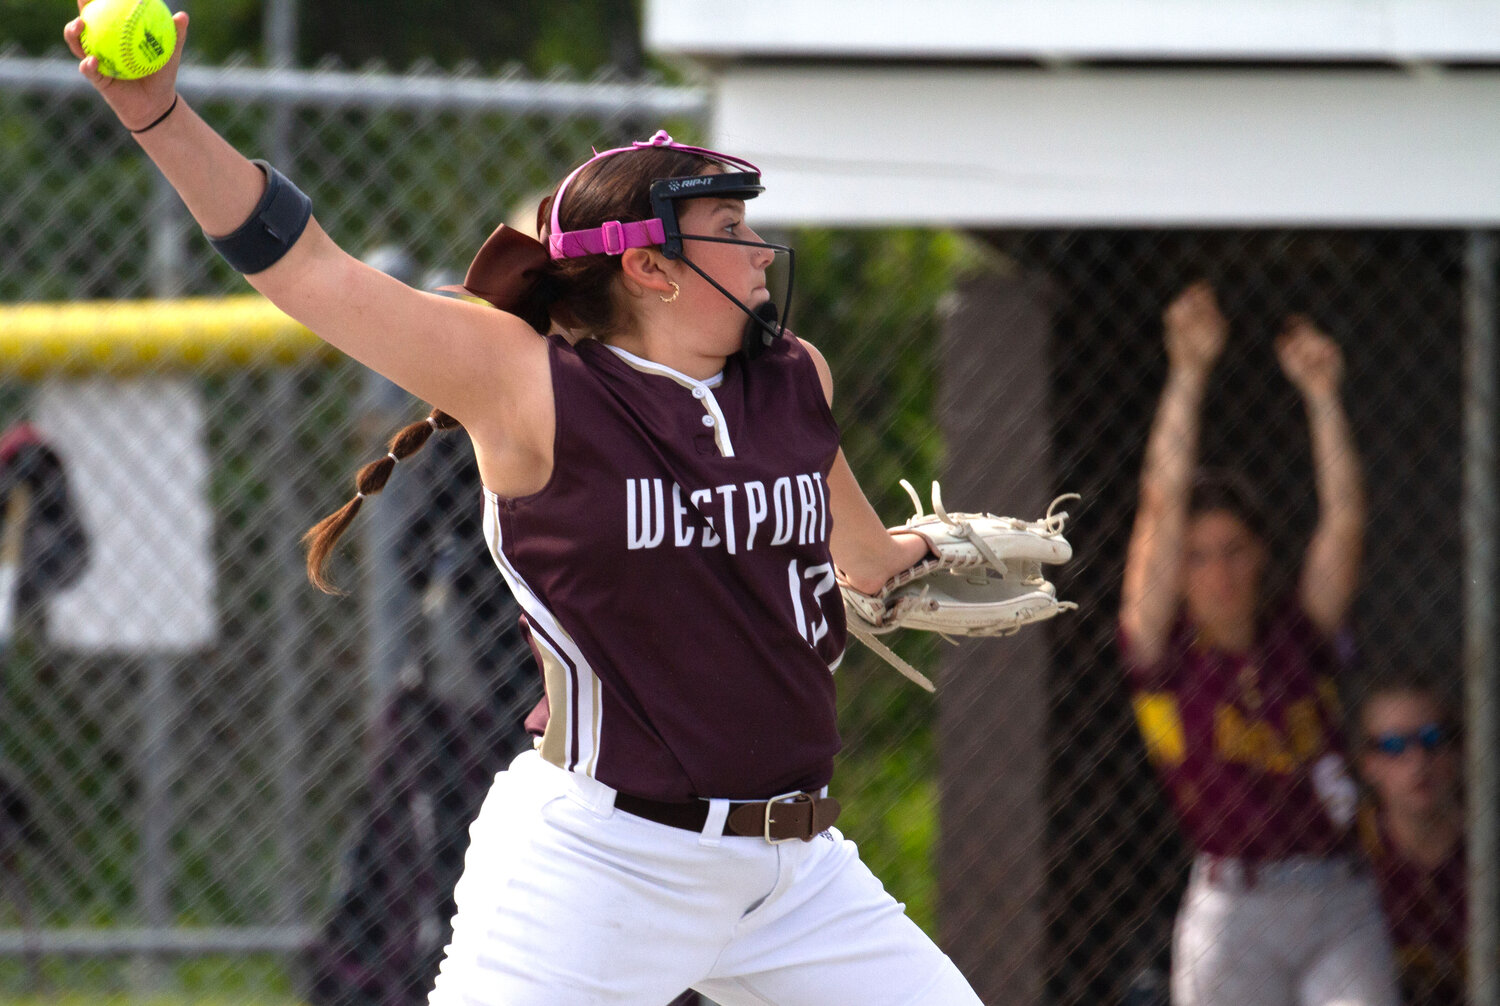 Mackenzy Ponte winds up to make a pitch during the Bristol Aggie game.